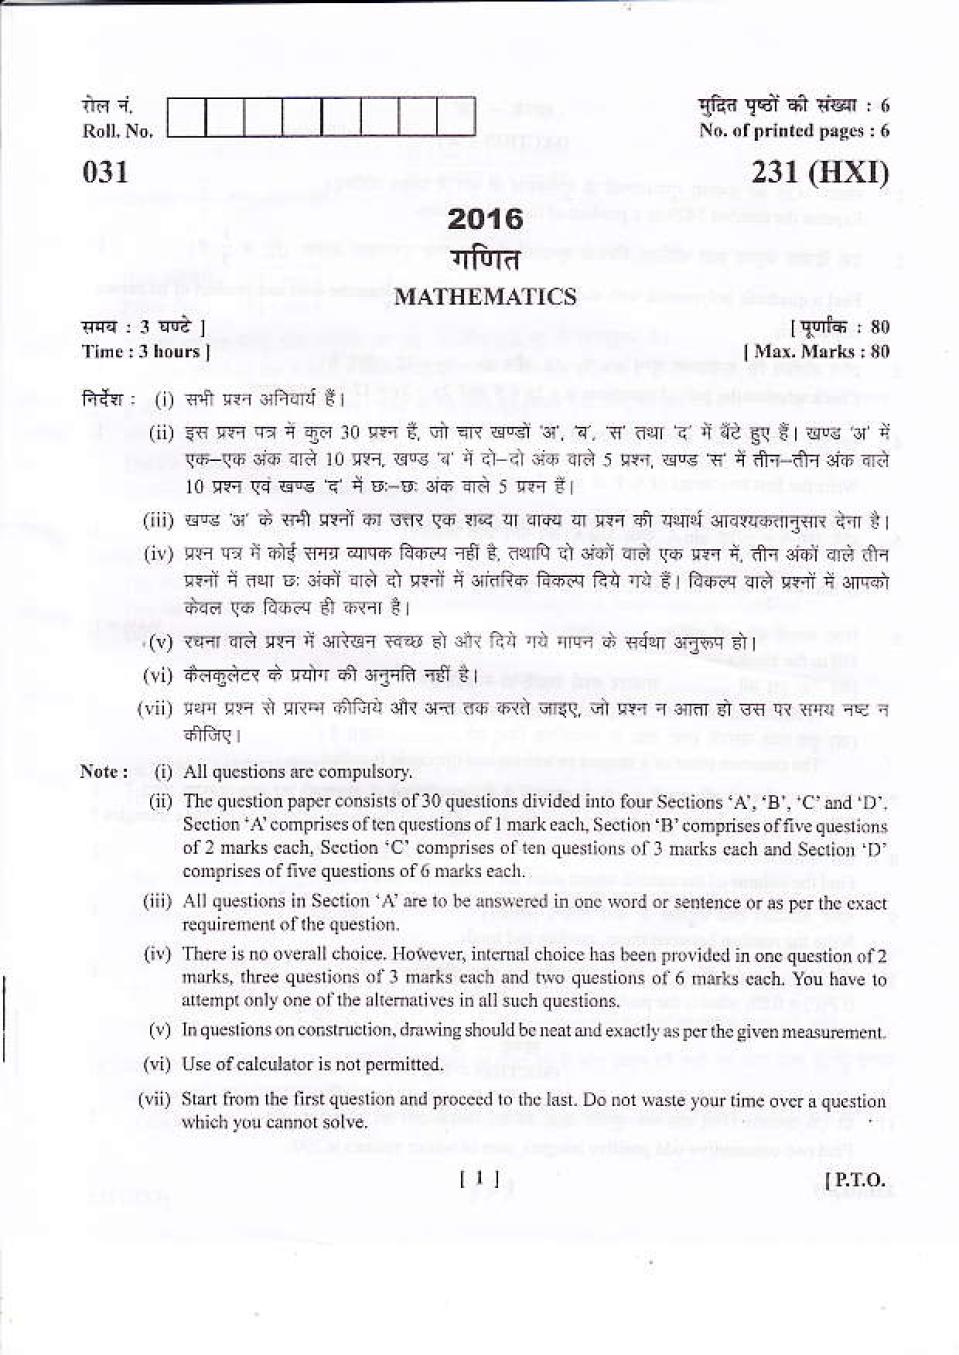 Uttarakhand Board Class 10 Question Paper 2016 for Mathematics - Page 1